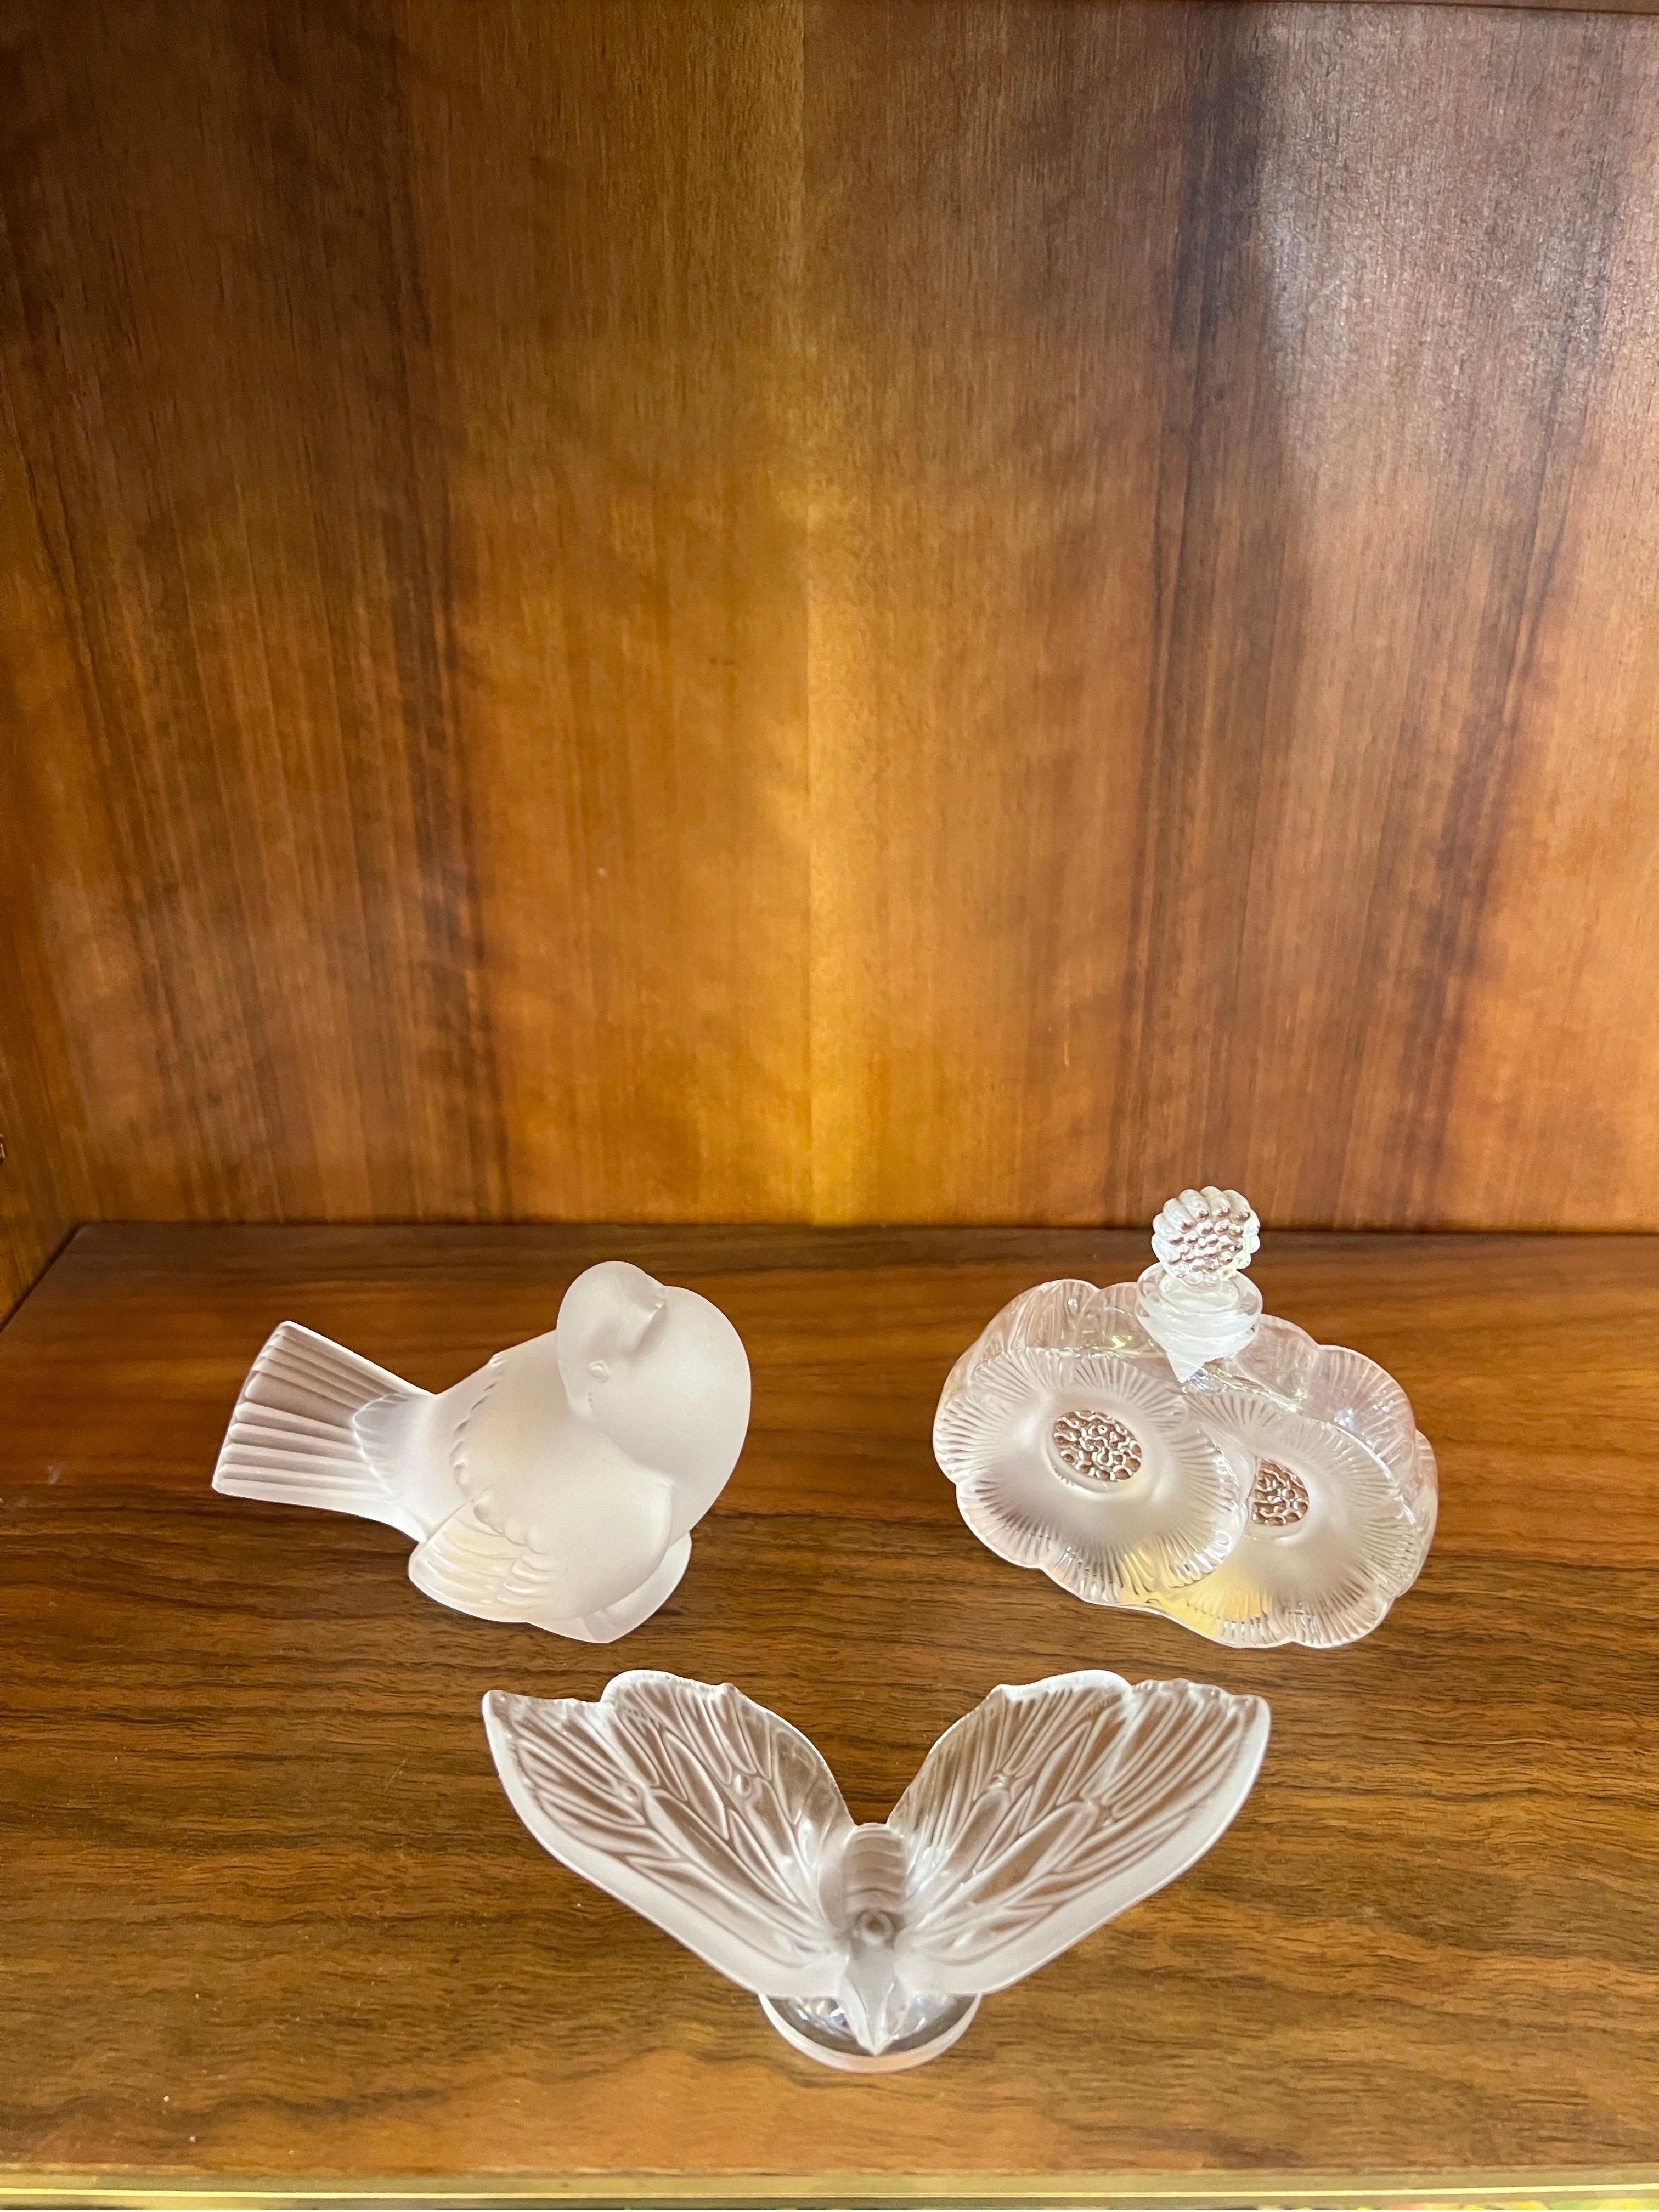 Set of three Vintage Lalique Crystal Scultures (one sparrow, one butterfly and one perfume bottle).
- Frosted crystal sparrow / bird sculpture by Lalique of France.
The bird is in very good vintage condition with no chips or cracks and measure cm